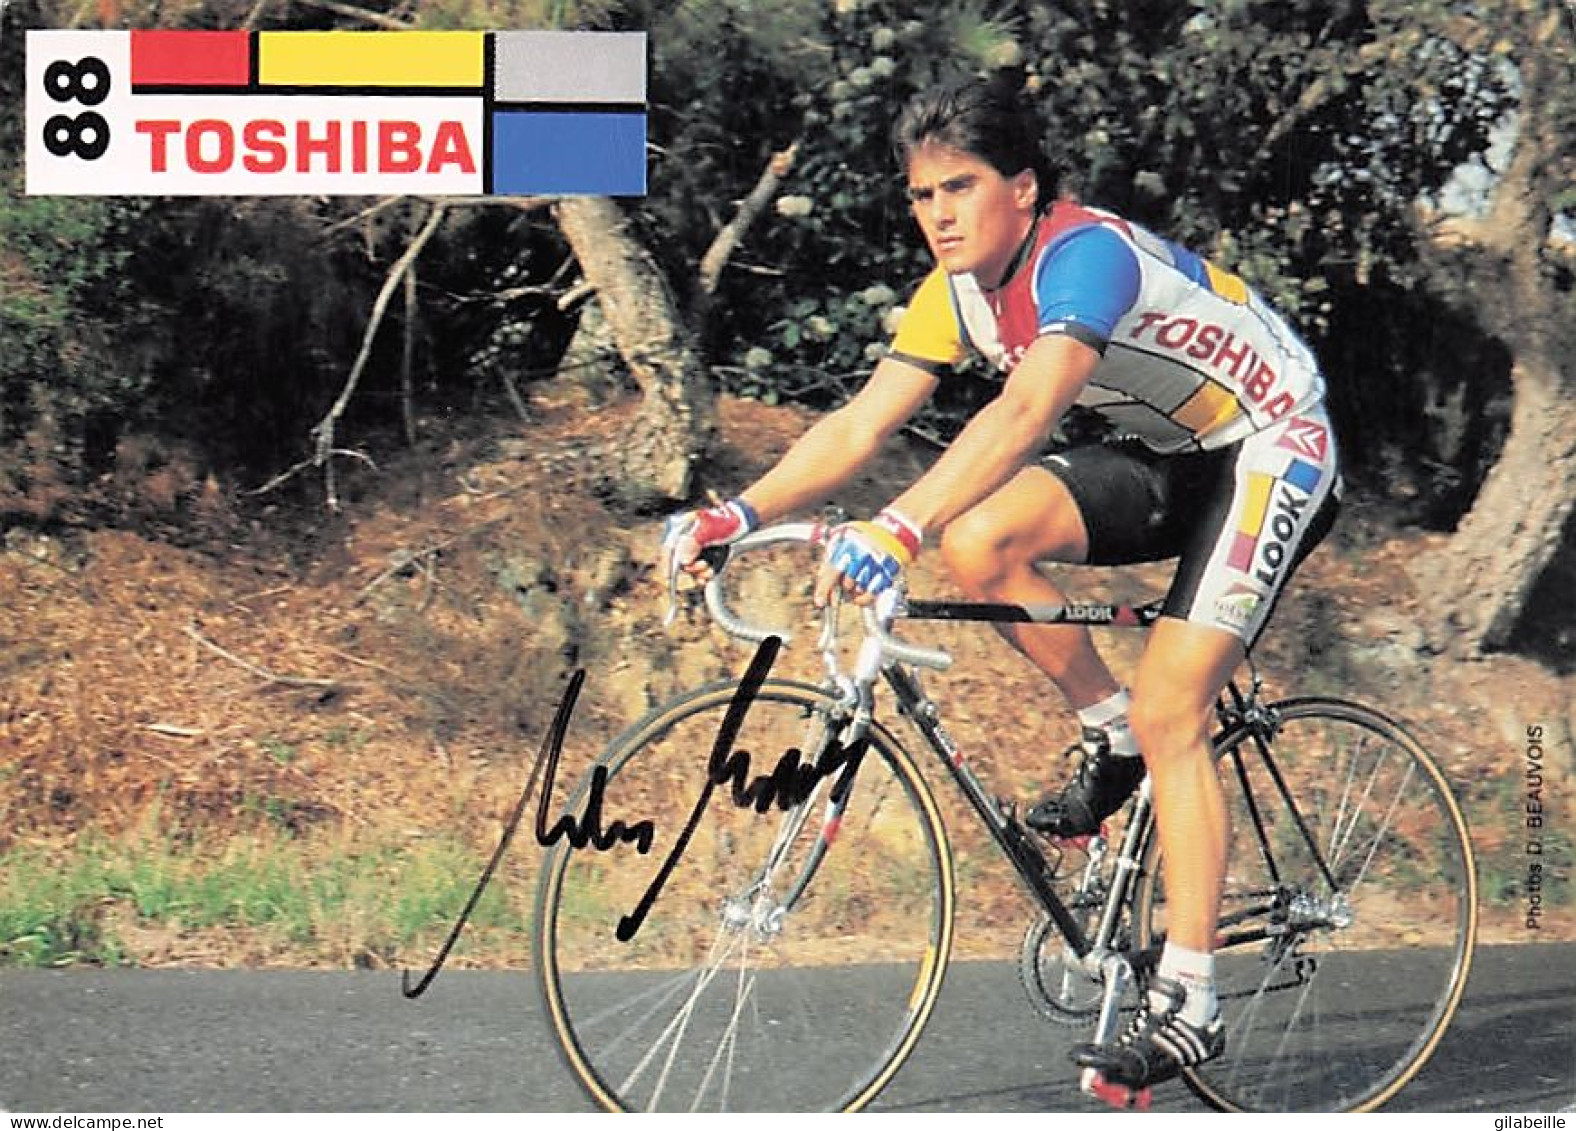 Vélo Coureur Cycliste Allemand Andreas Kappes - Team Toshiba  -   Cycling - Cyclisme - Ciclismo - Wielrennen - Signée - Wielrennen